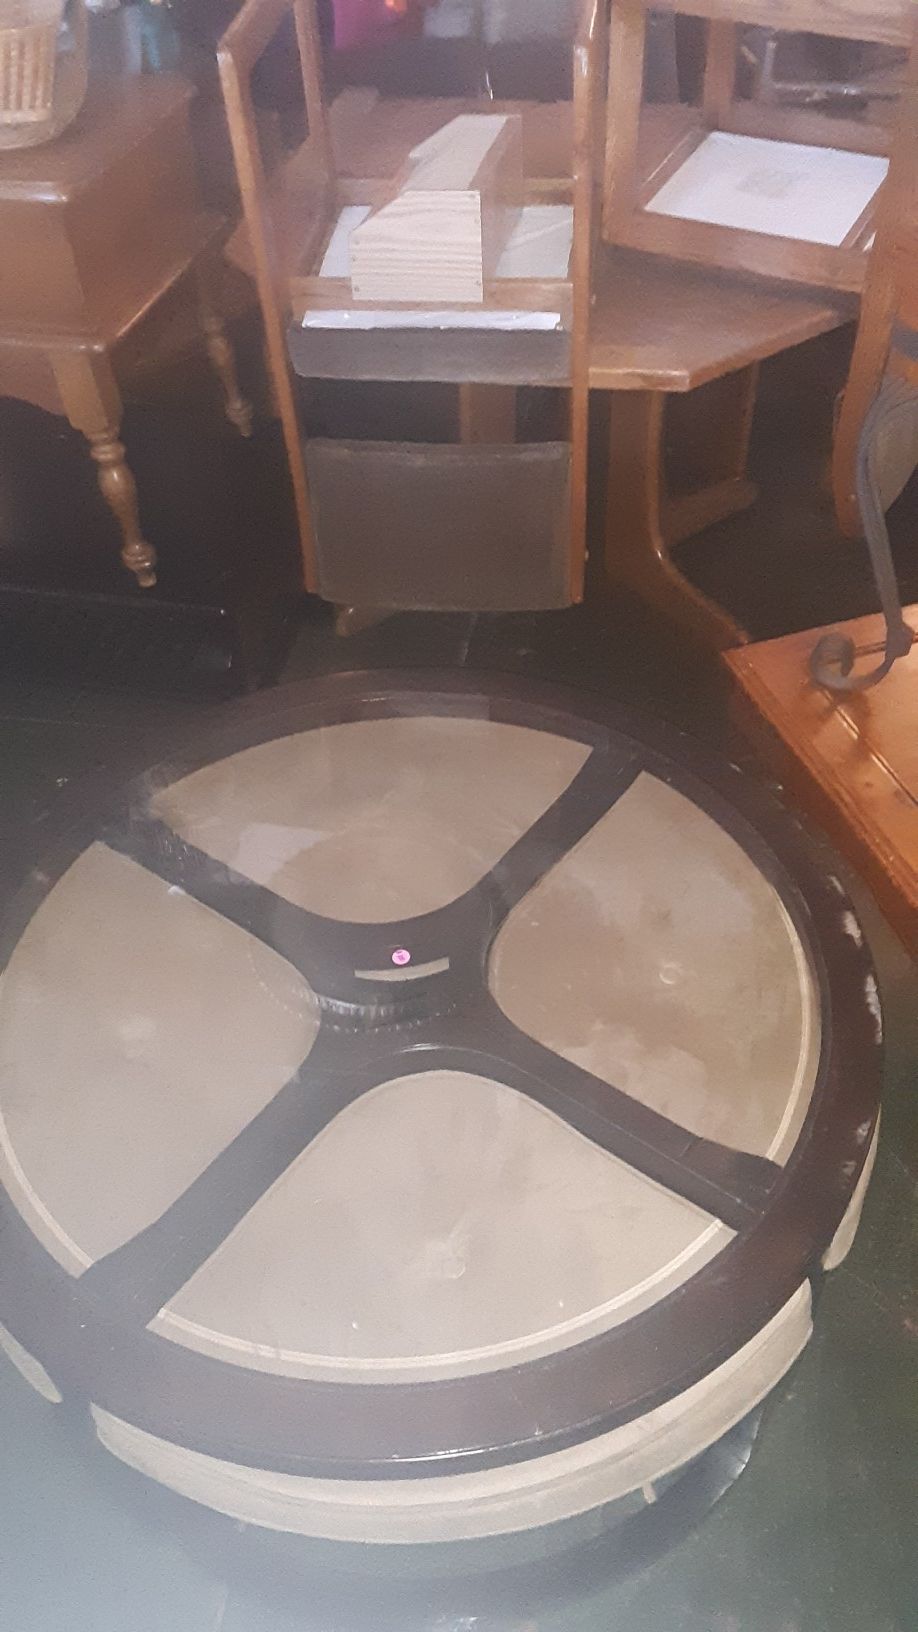 40" diameter coffee table with 4 chairs